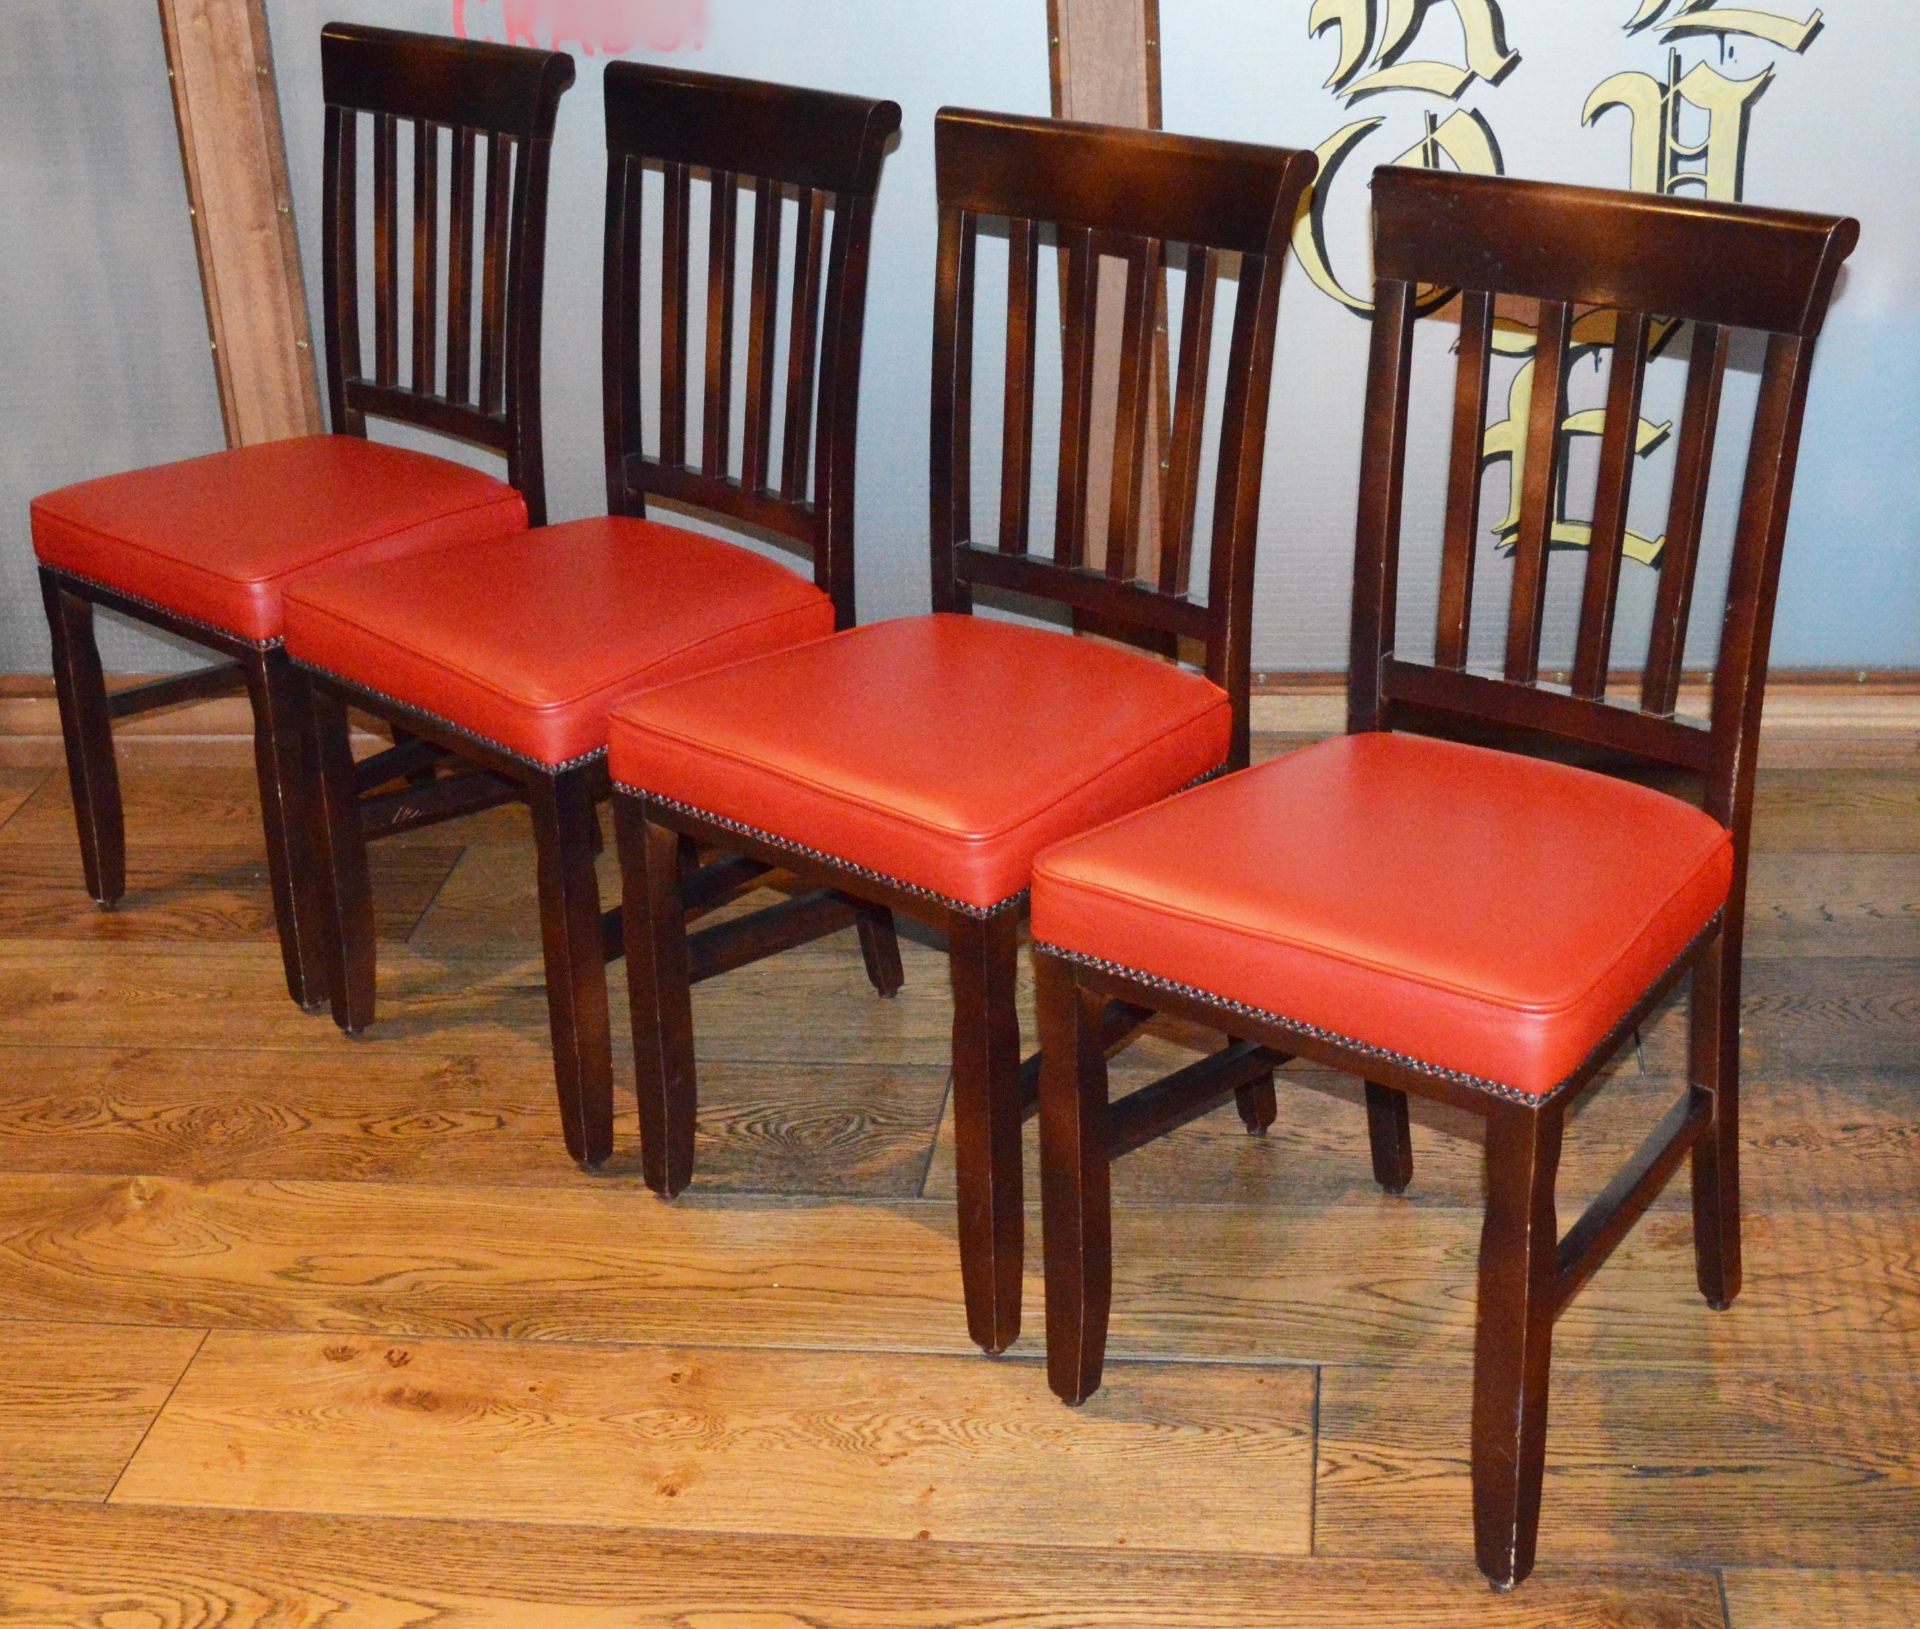 4 x Harley Chairs With Hardwoord Frames - Height 90 x Width 44 x Depth 39 cms - Seat Height 48 cms - Image 5 of 5